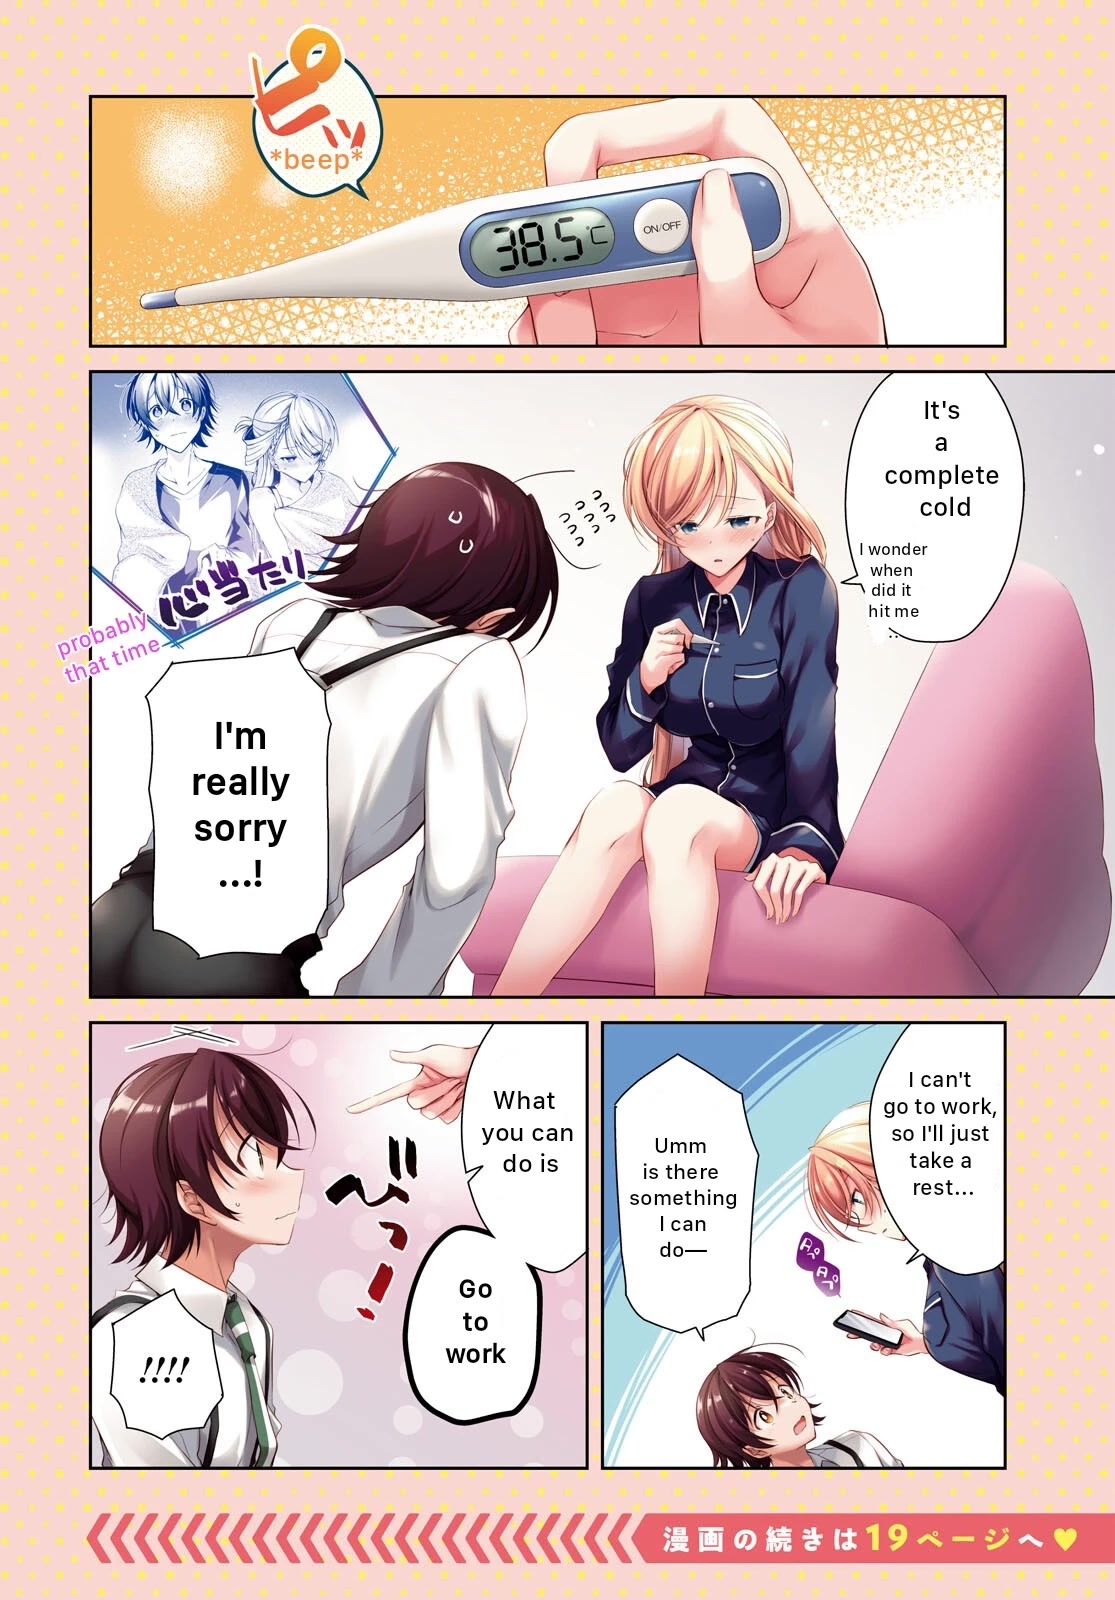 Isshiki-san Wants to Know About Love. - chapter 21 - #4